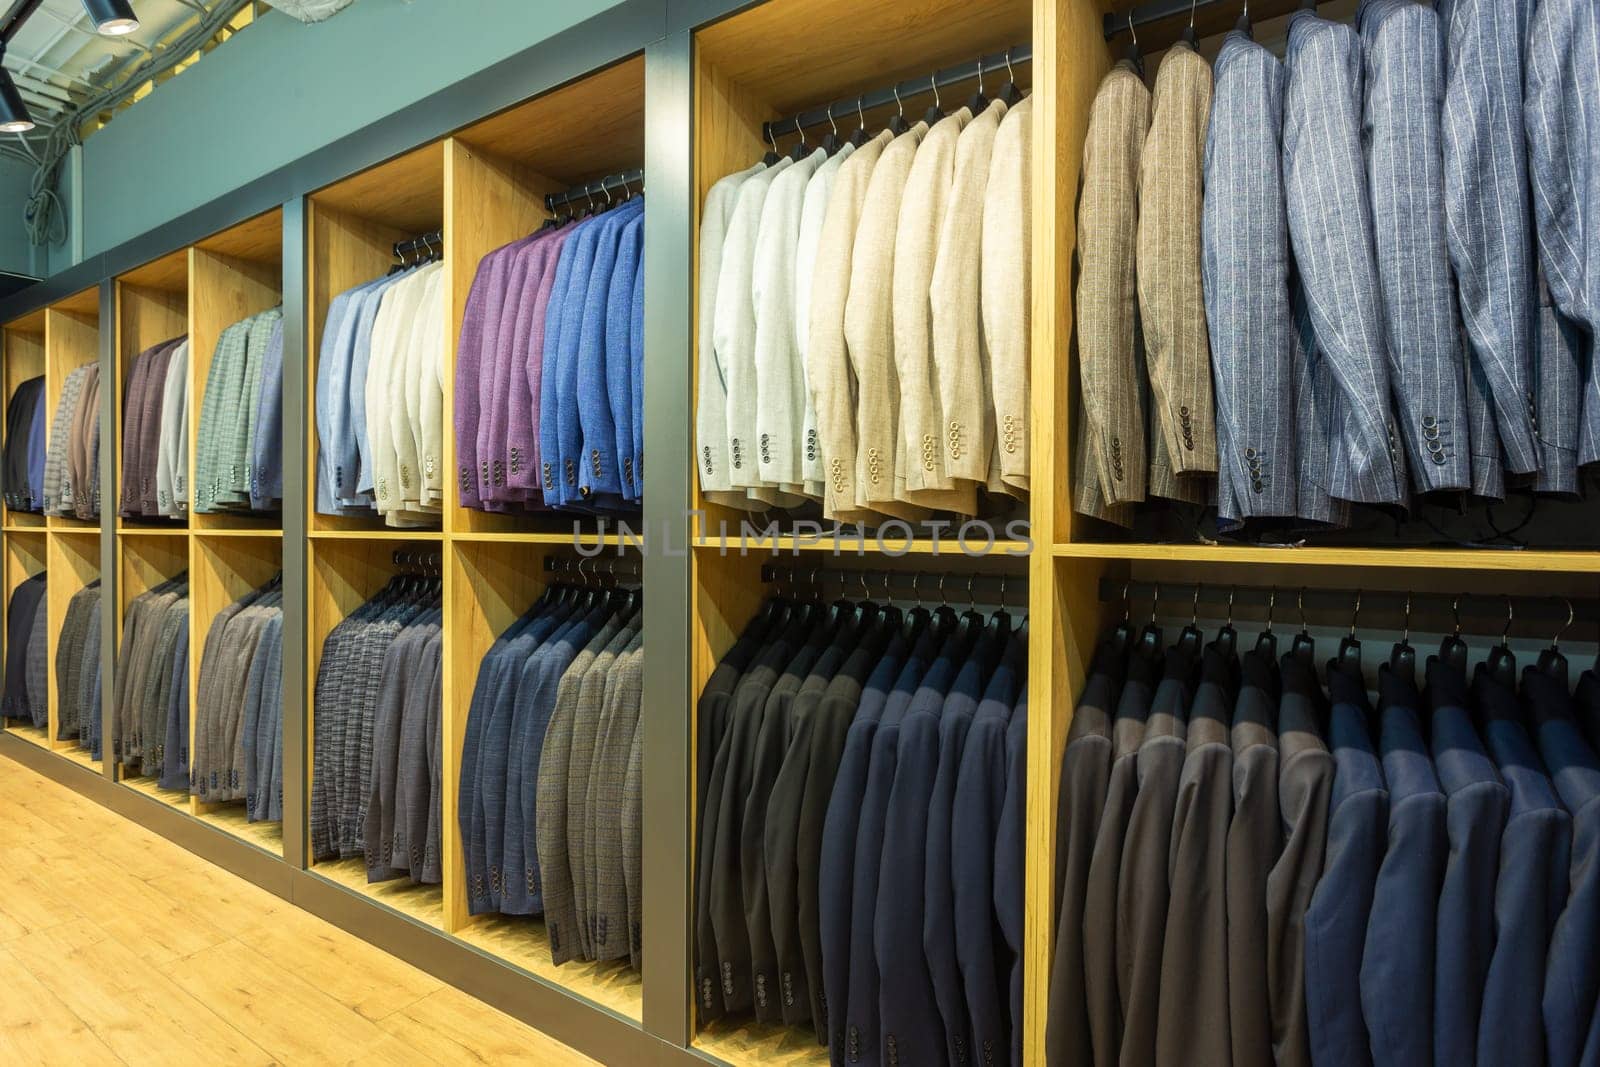 A row of men's suits, jackets hanging on a rack for display. Elegant man suit jackets hanging in a row on hangers.